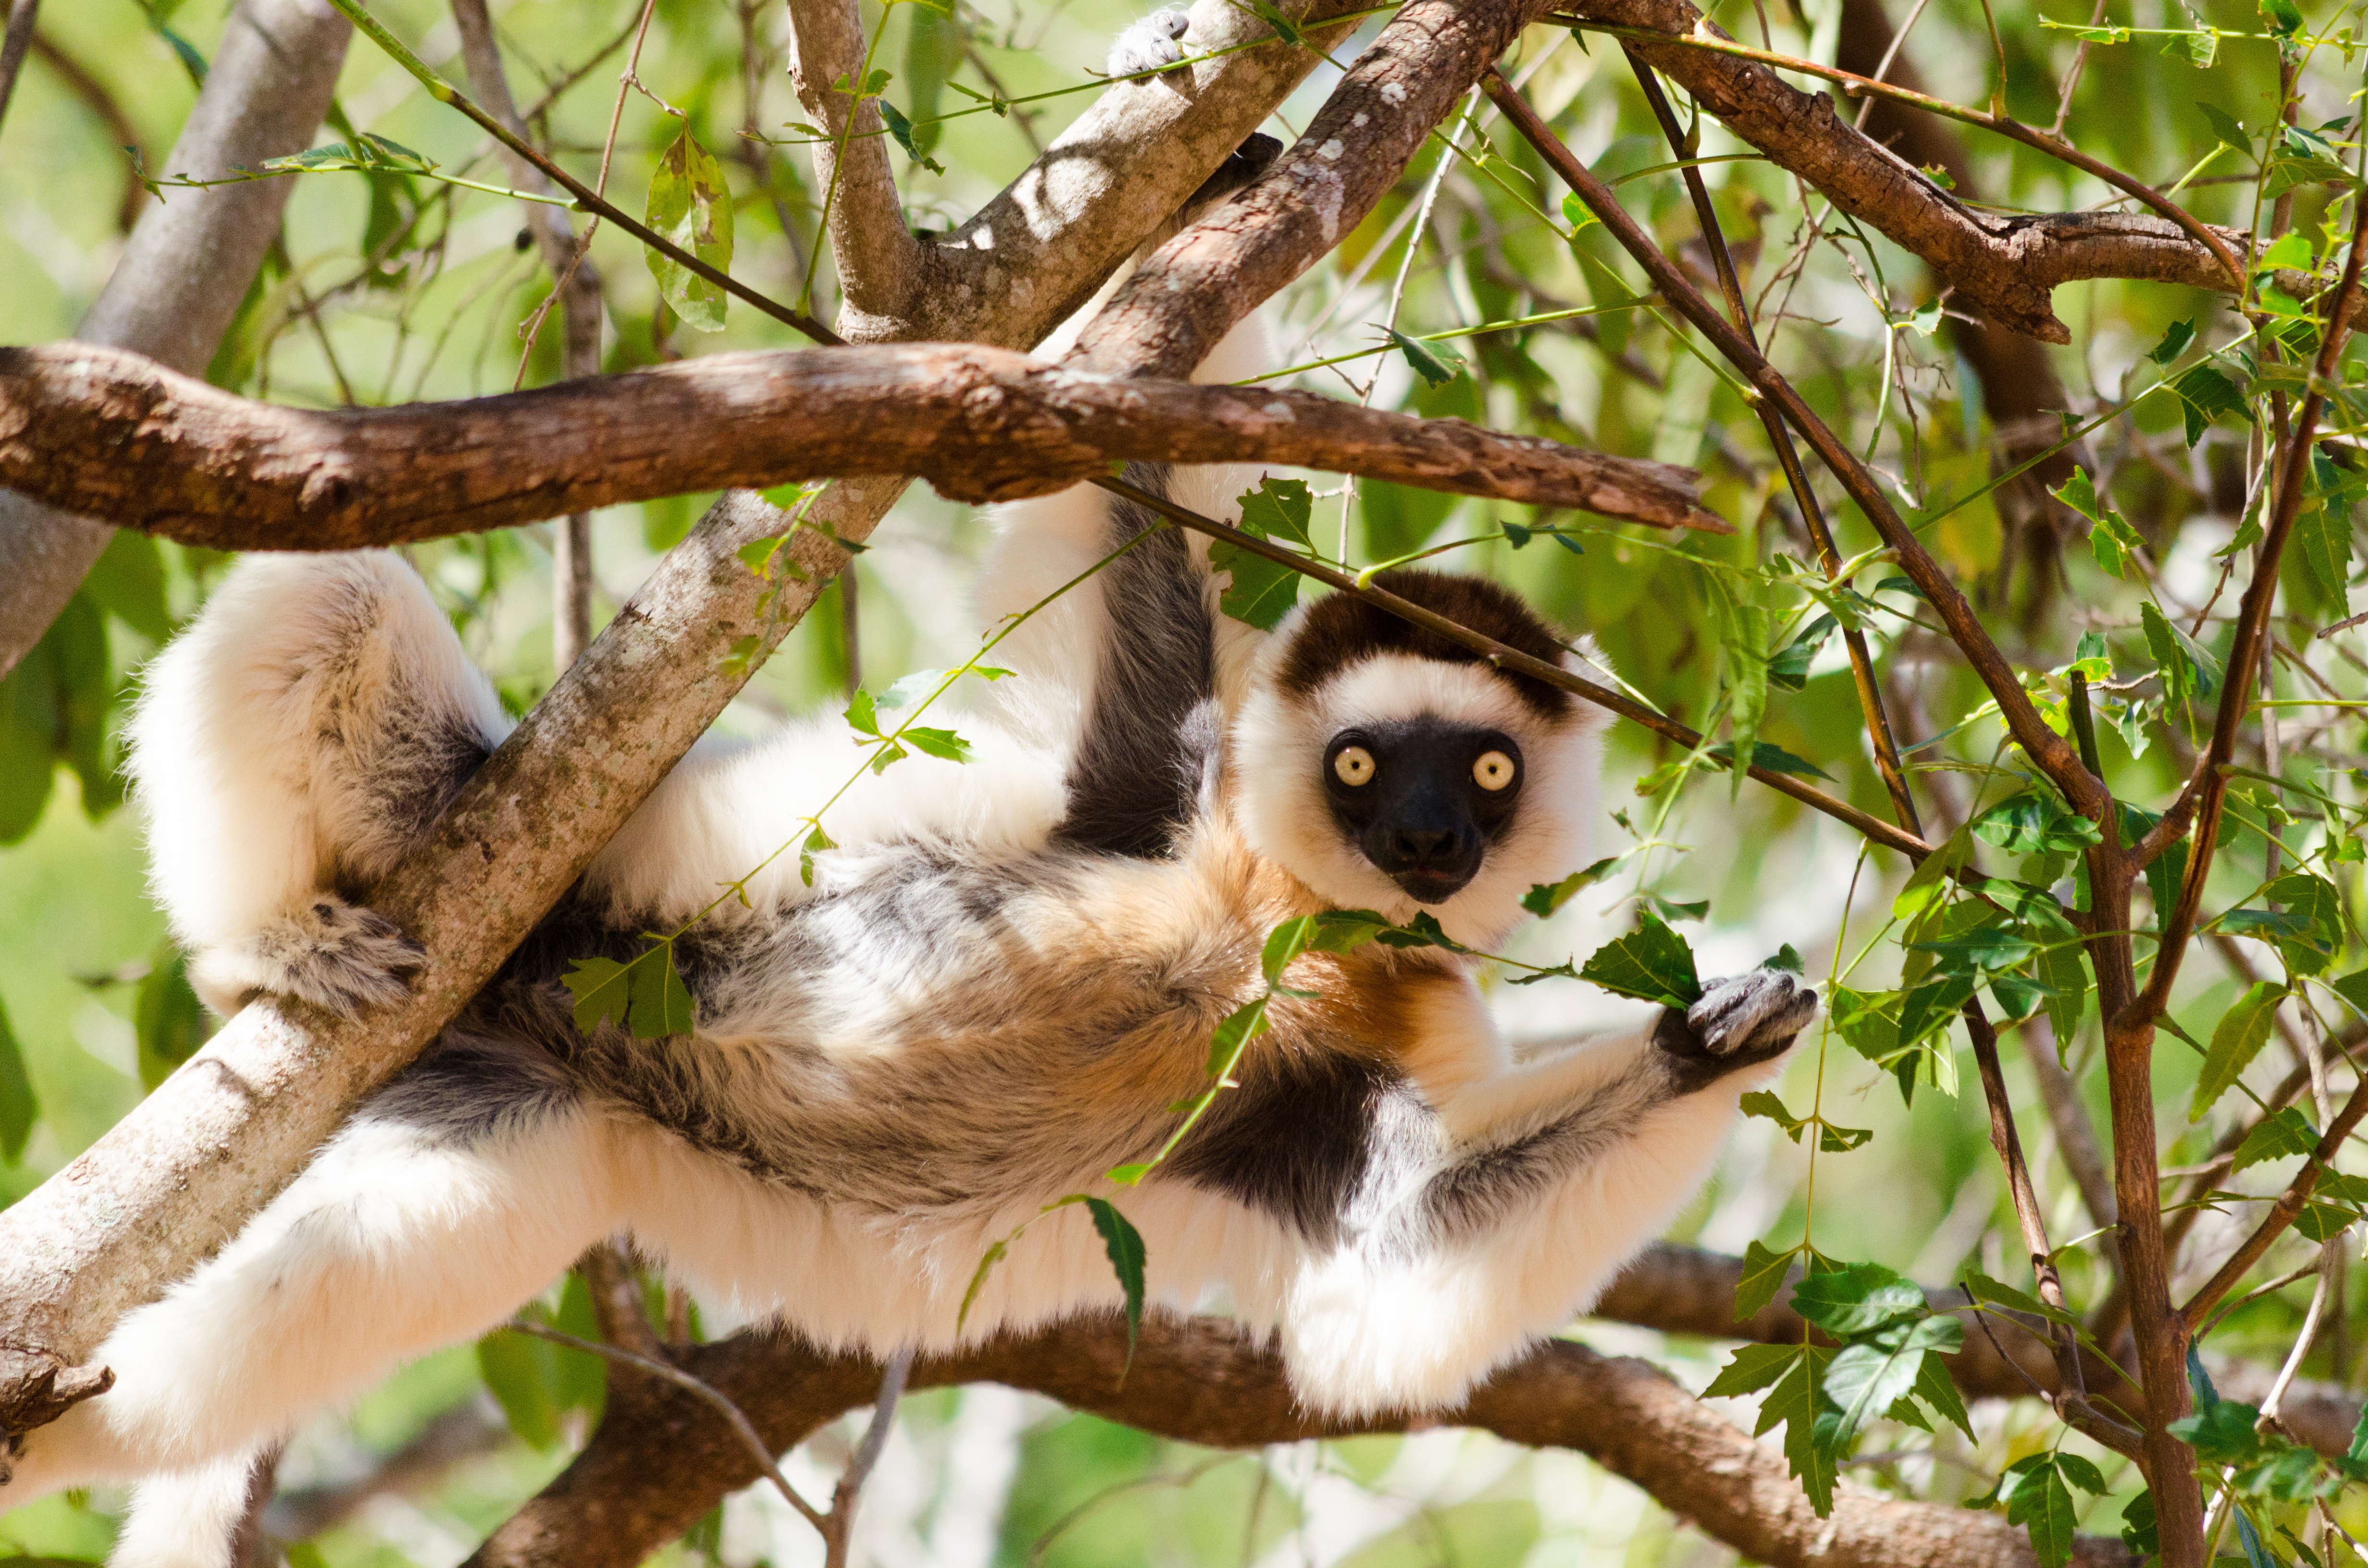 Funny and curious sifaka, Propithecus verreauxi, in the wild Berenty reserve, Madagascar